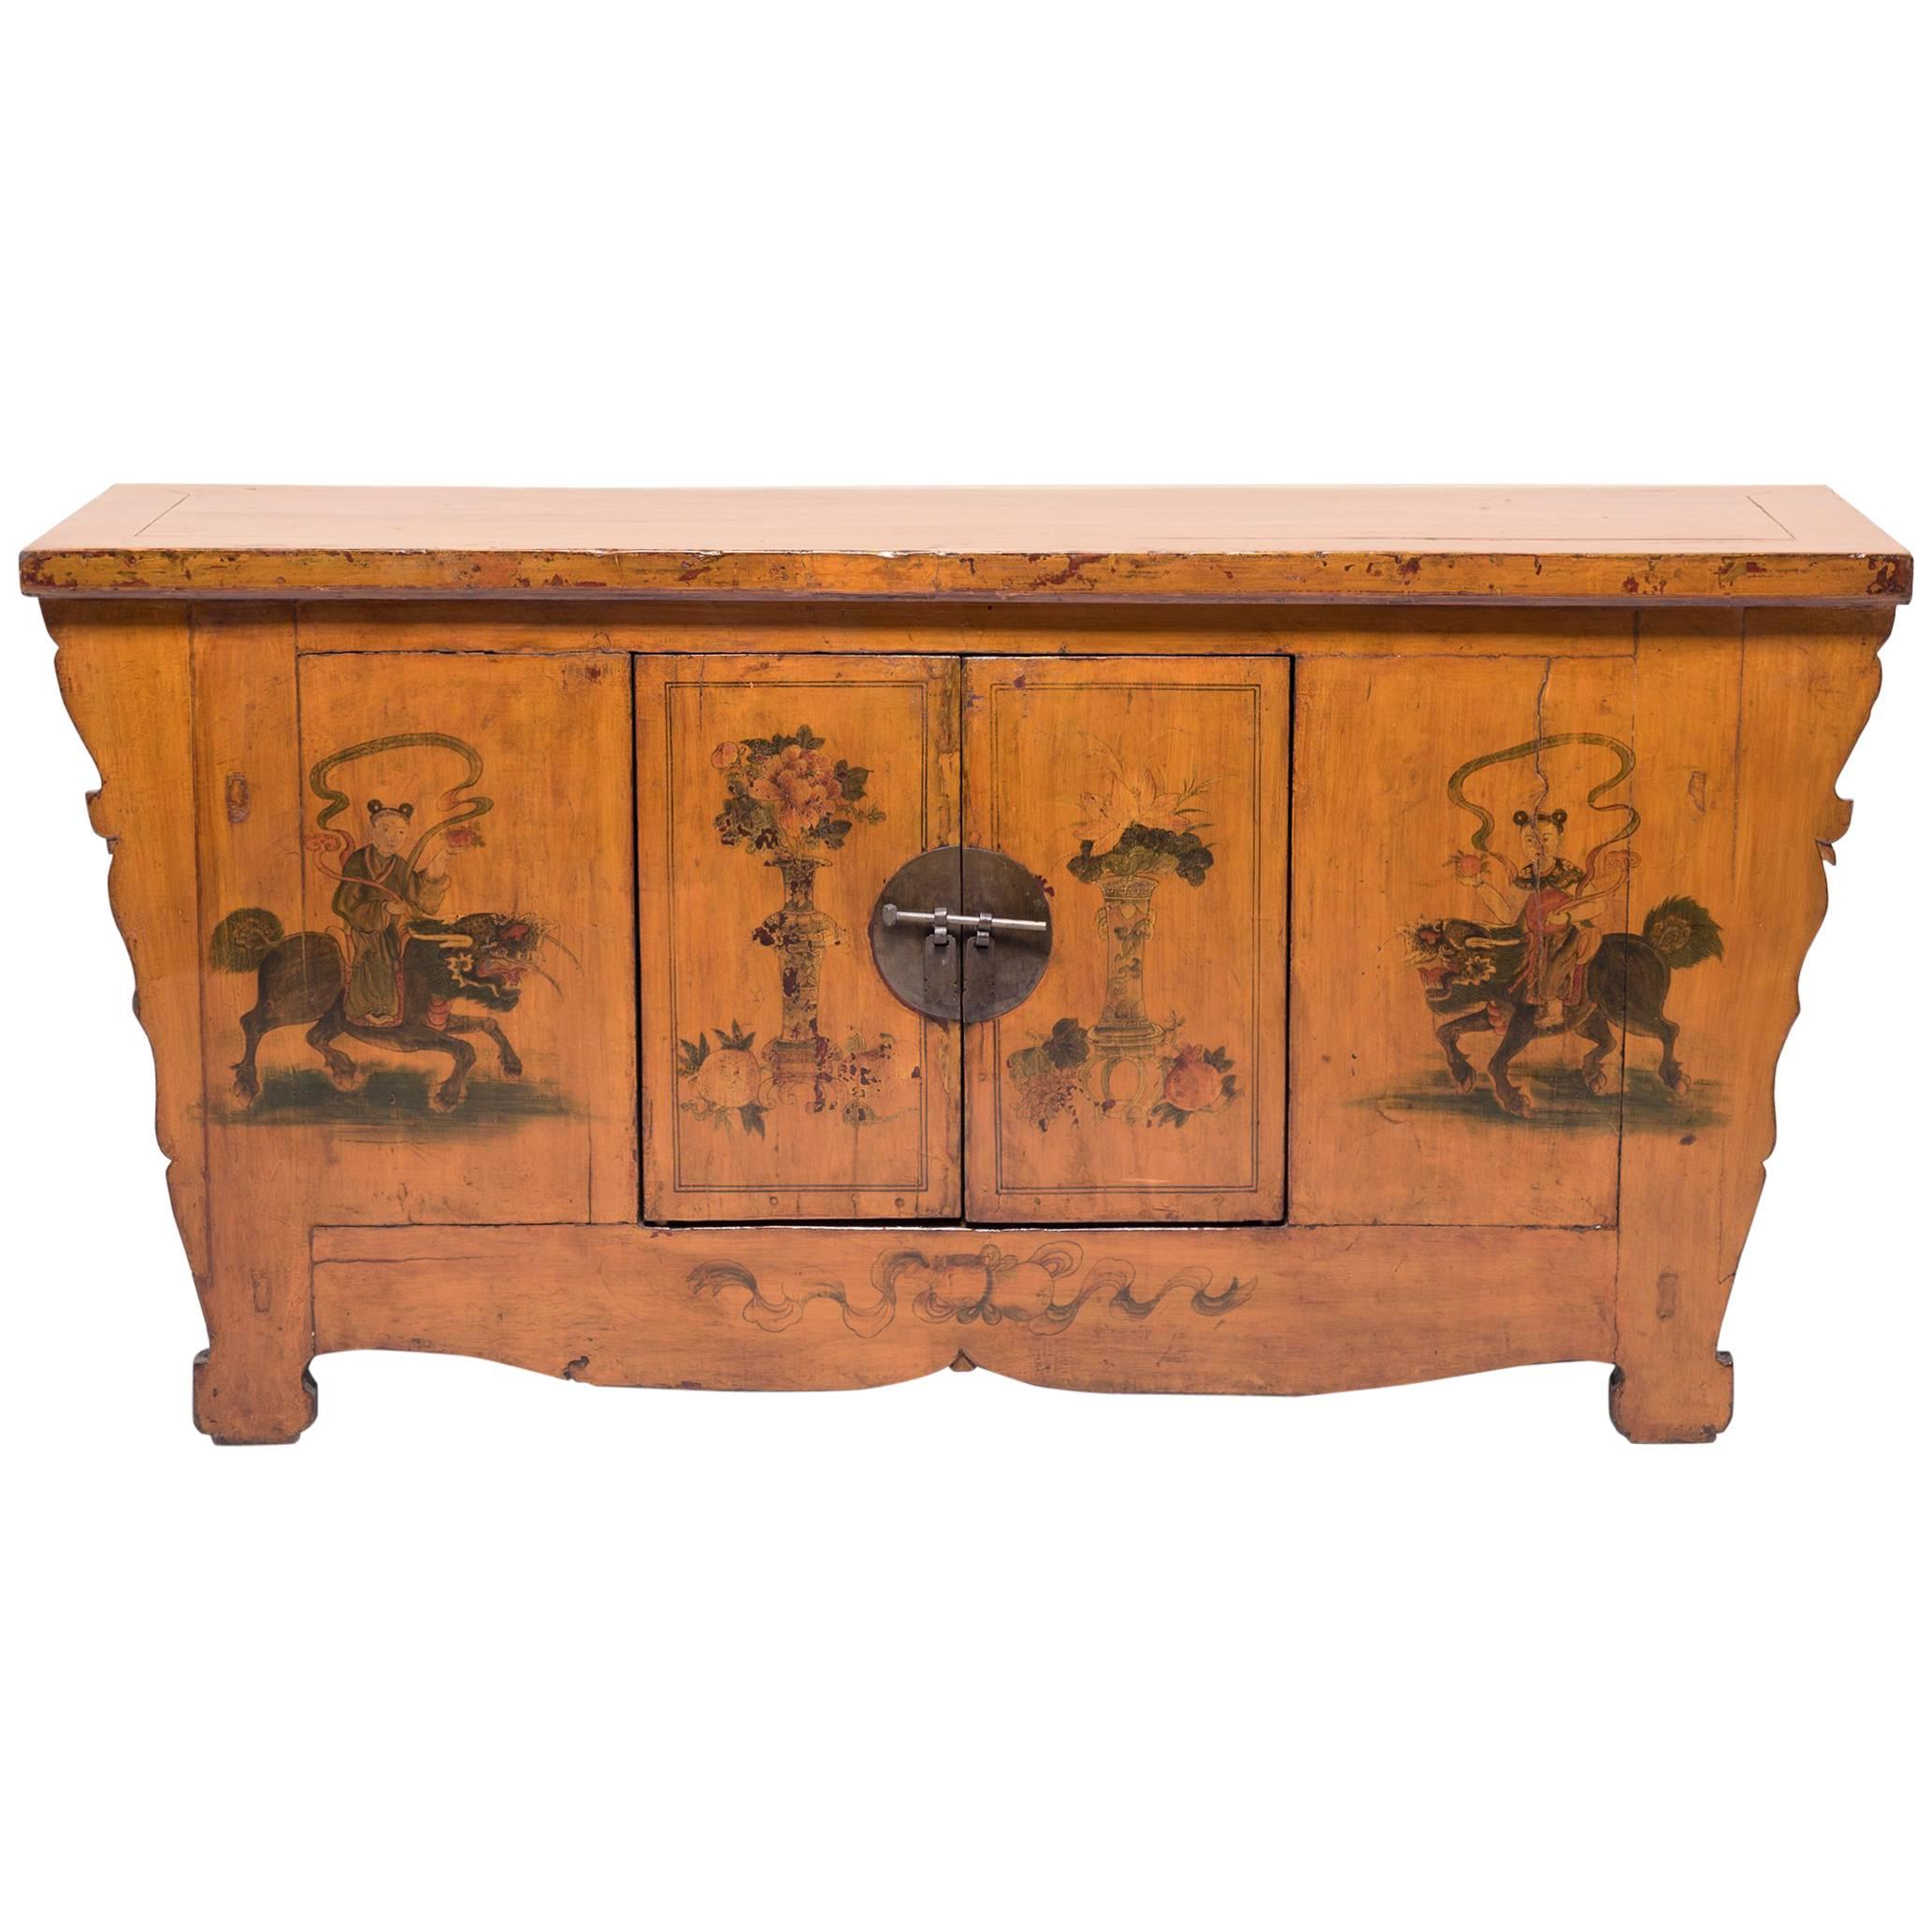 Early 20th Century Chinese Painted Qilin Sideboard